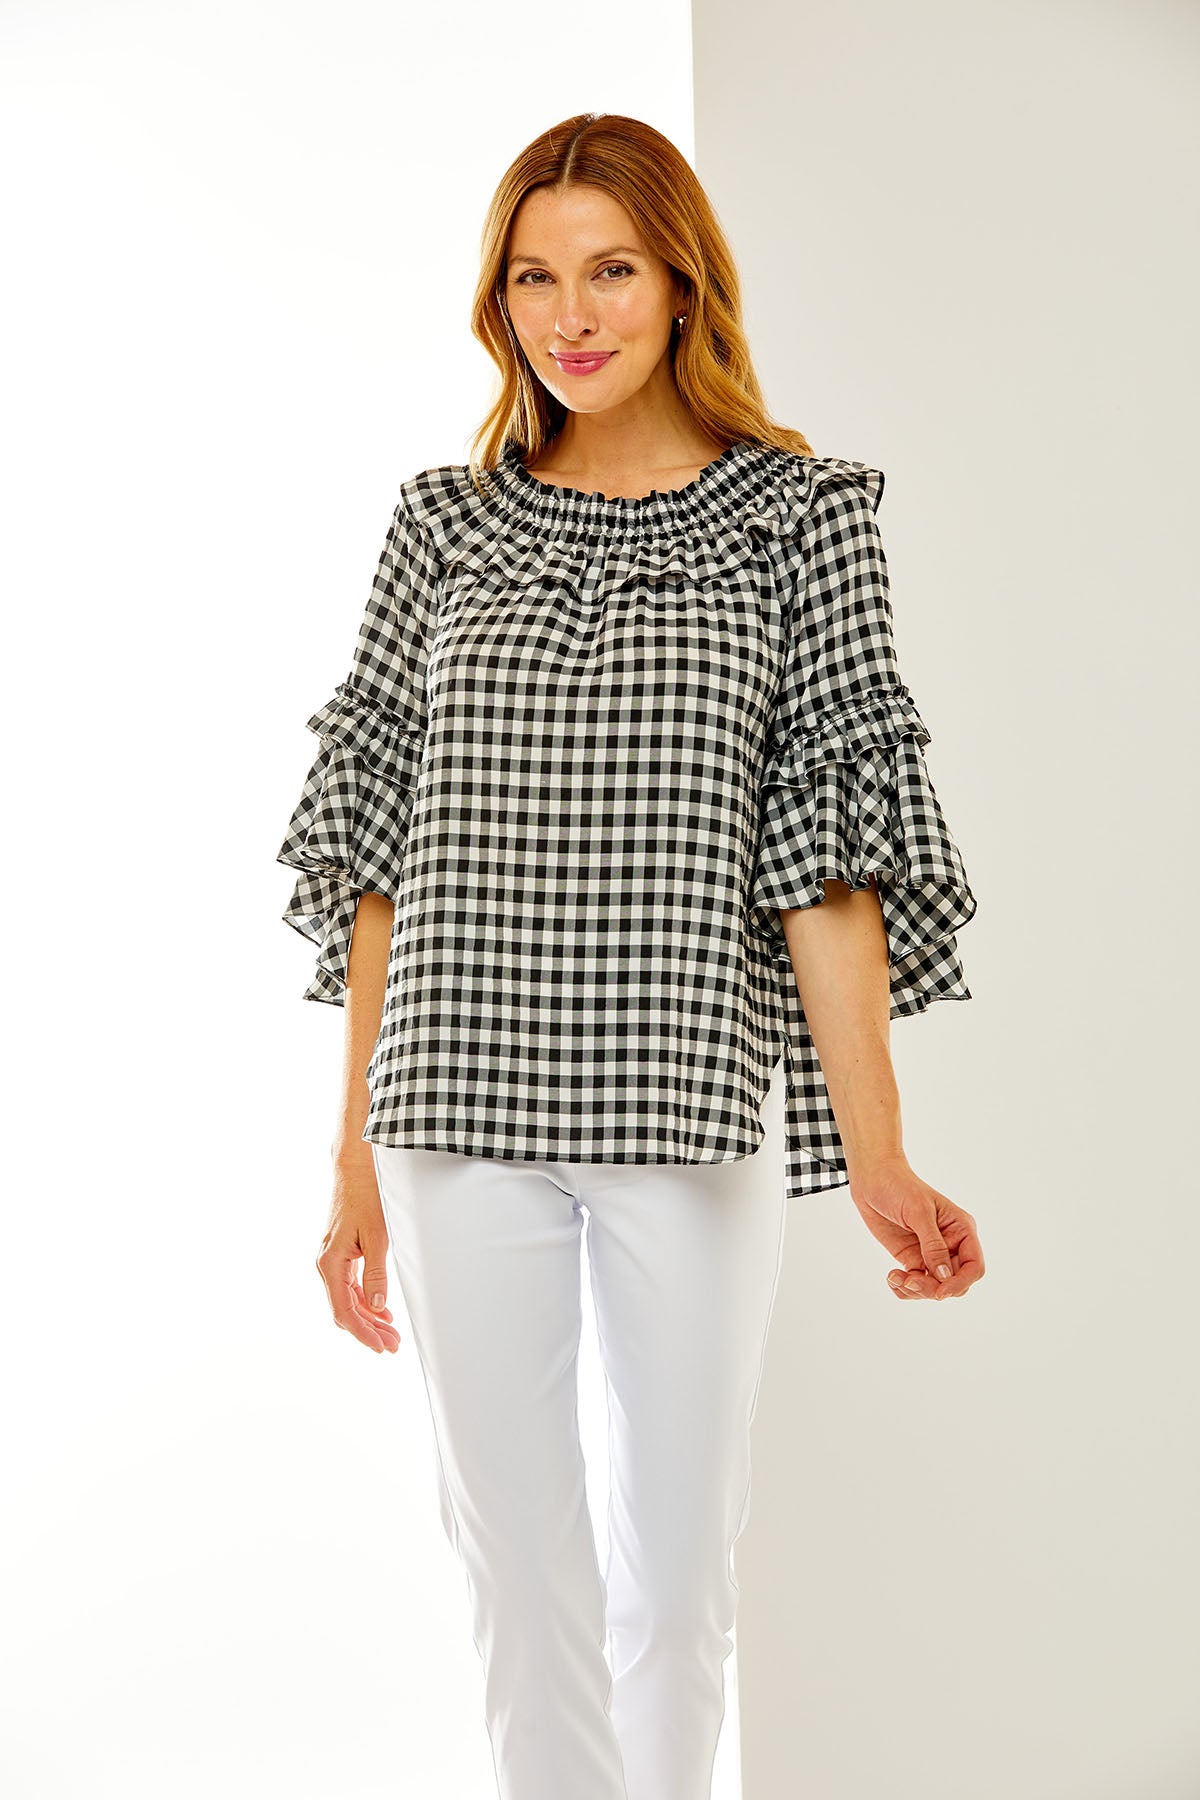 Woman in gingham blouse